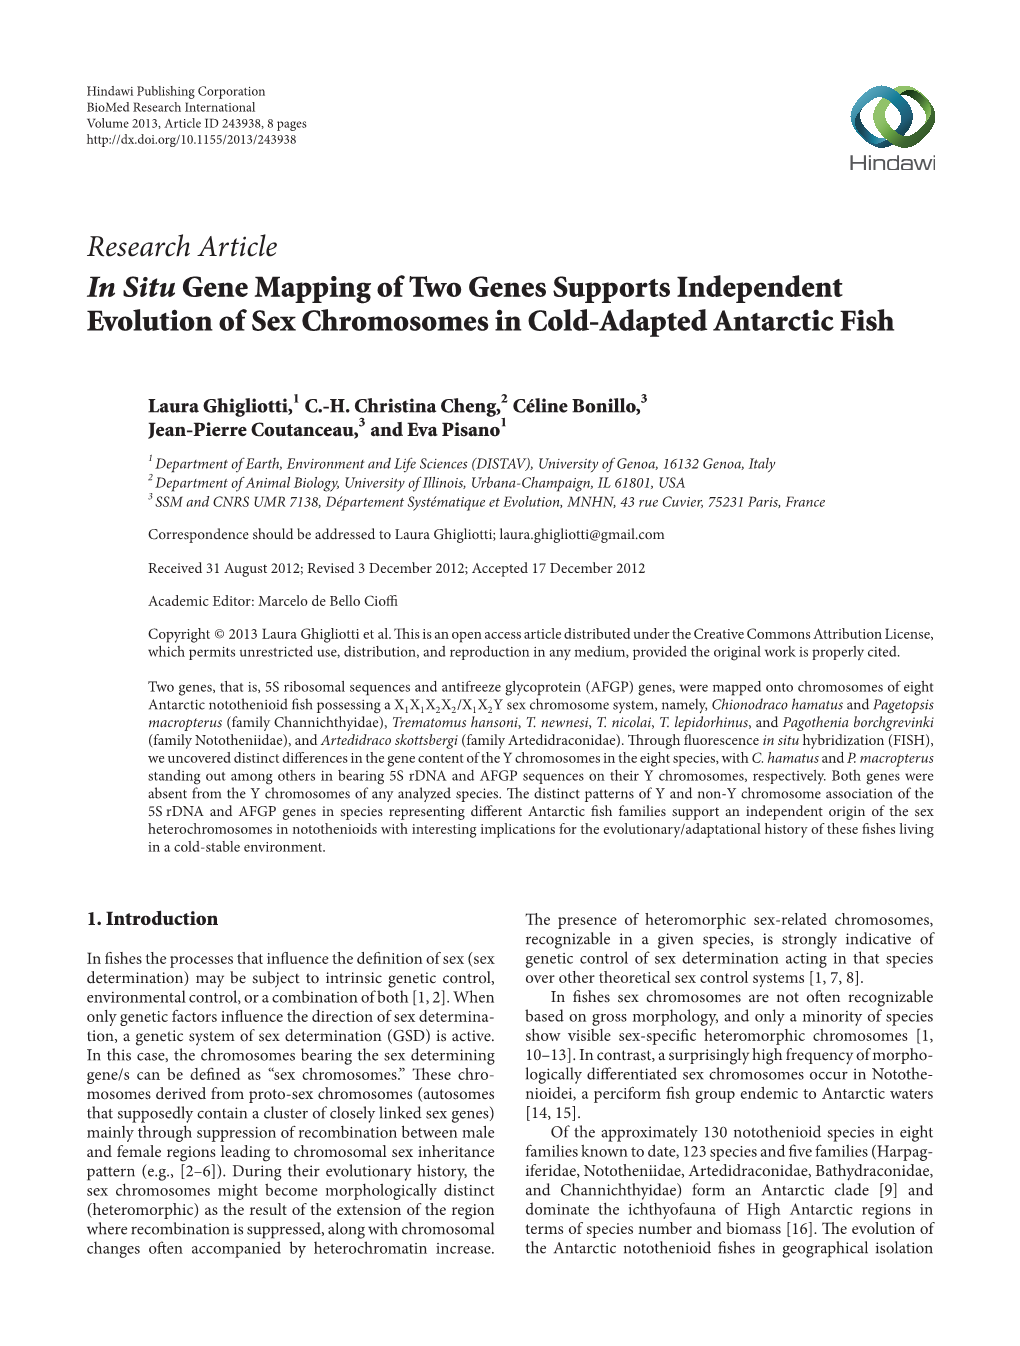 Research Article in Situ Gene Mapping of Two Genes Supports Independent Evolution of Sex Chromosomes in Cold-Adapted Antarctic Fish